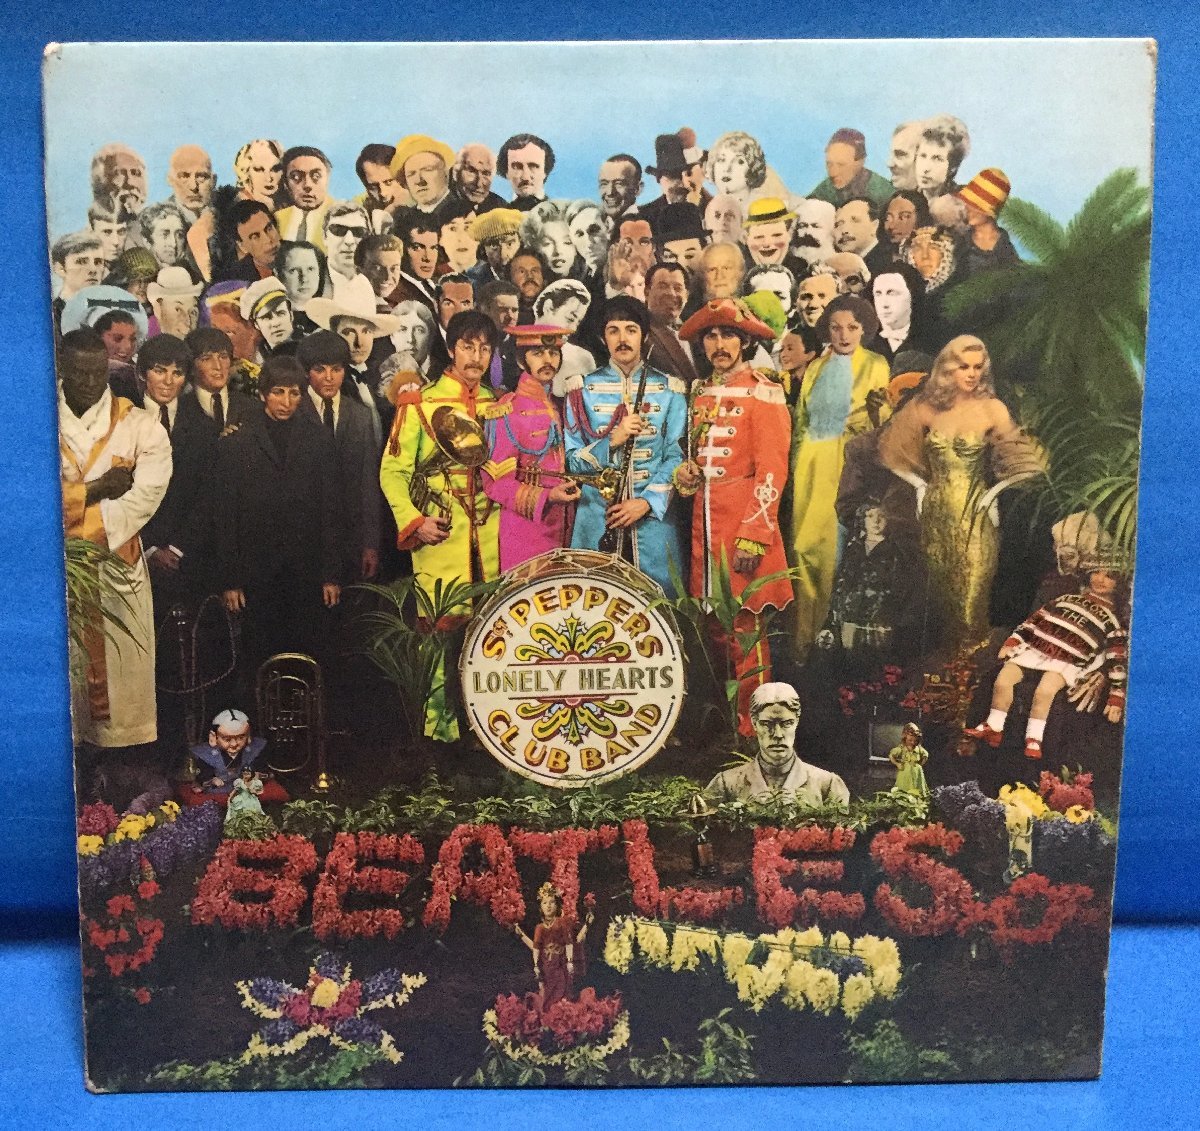 LP 洋楽 The Beatles / Sgt. Pepper's Lonely Hearts Club Band 英盤 mono 1/1 オリジナル_画像1